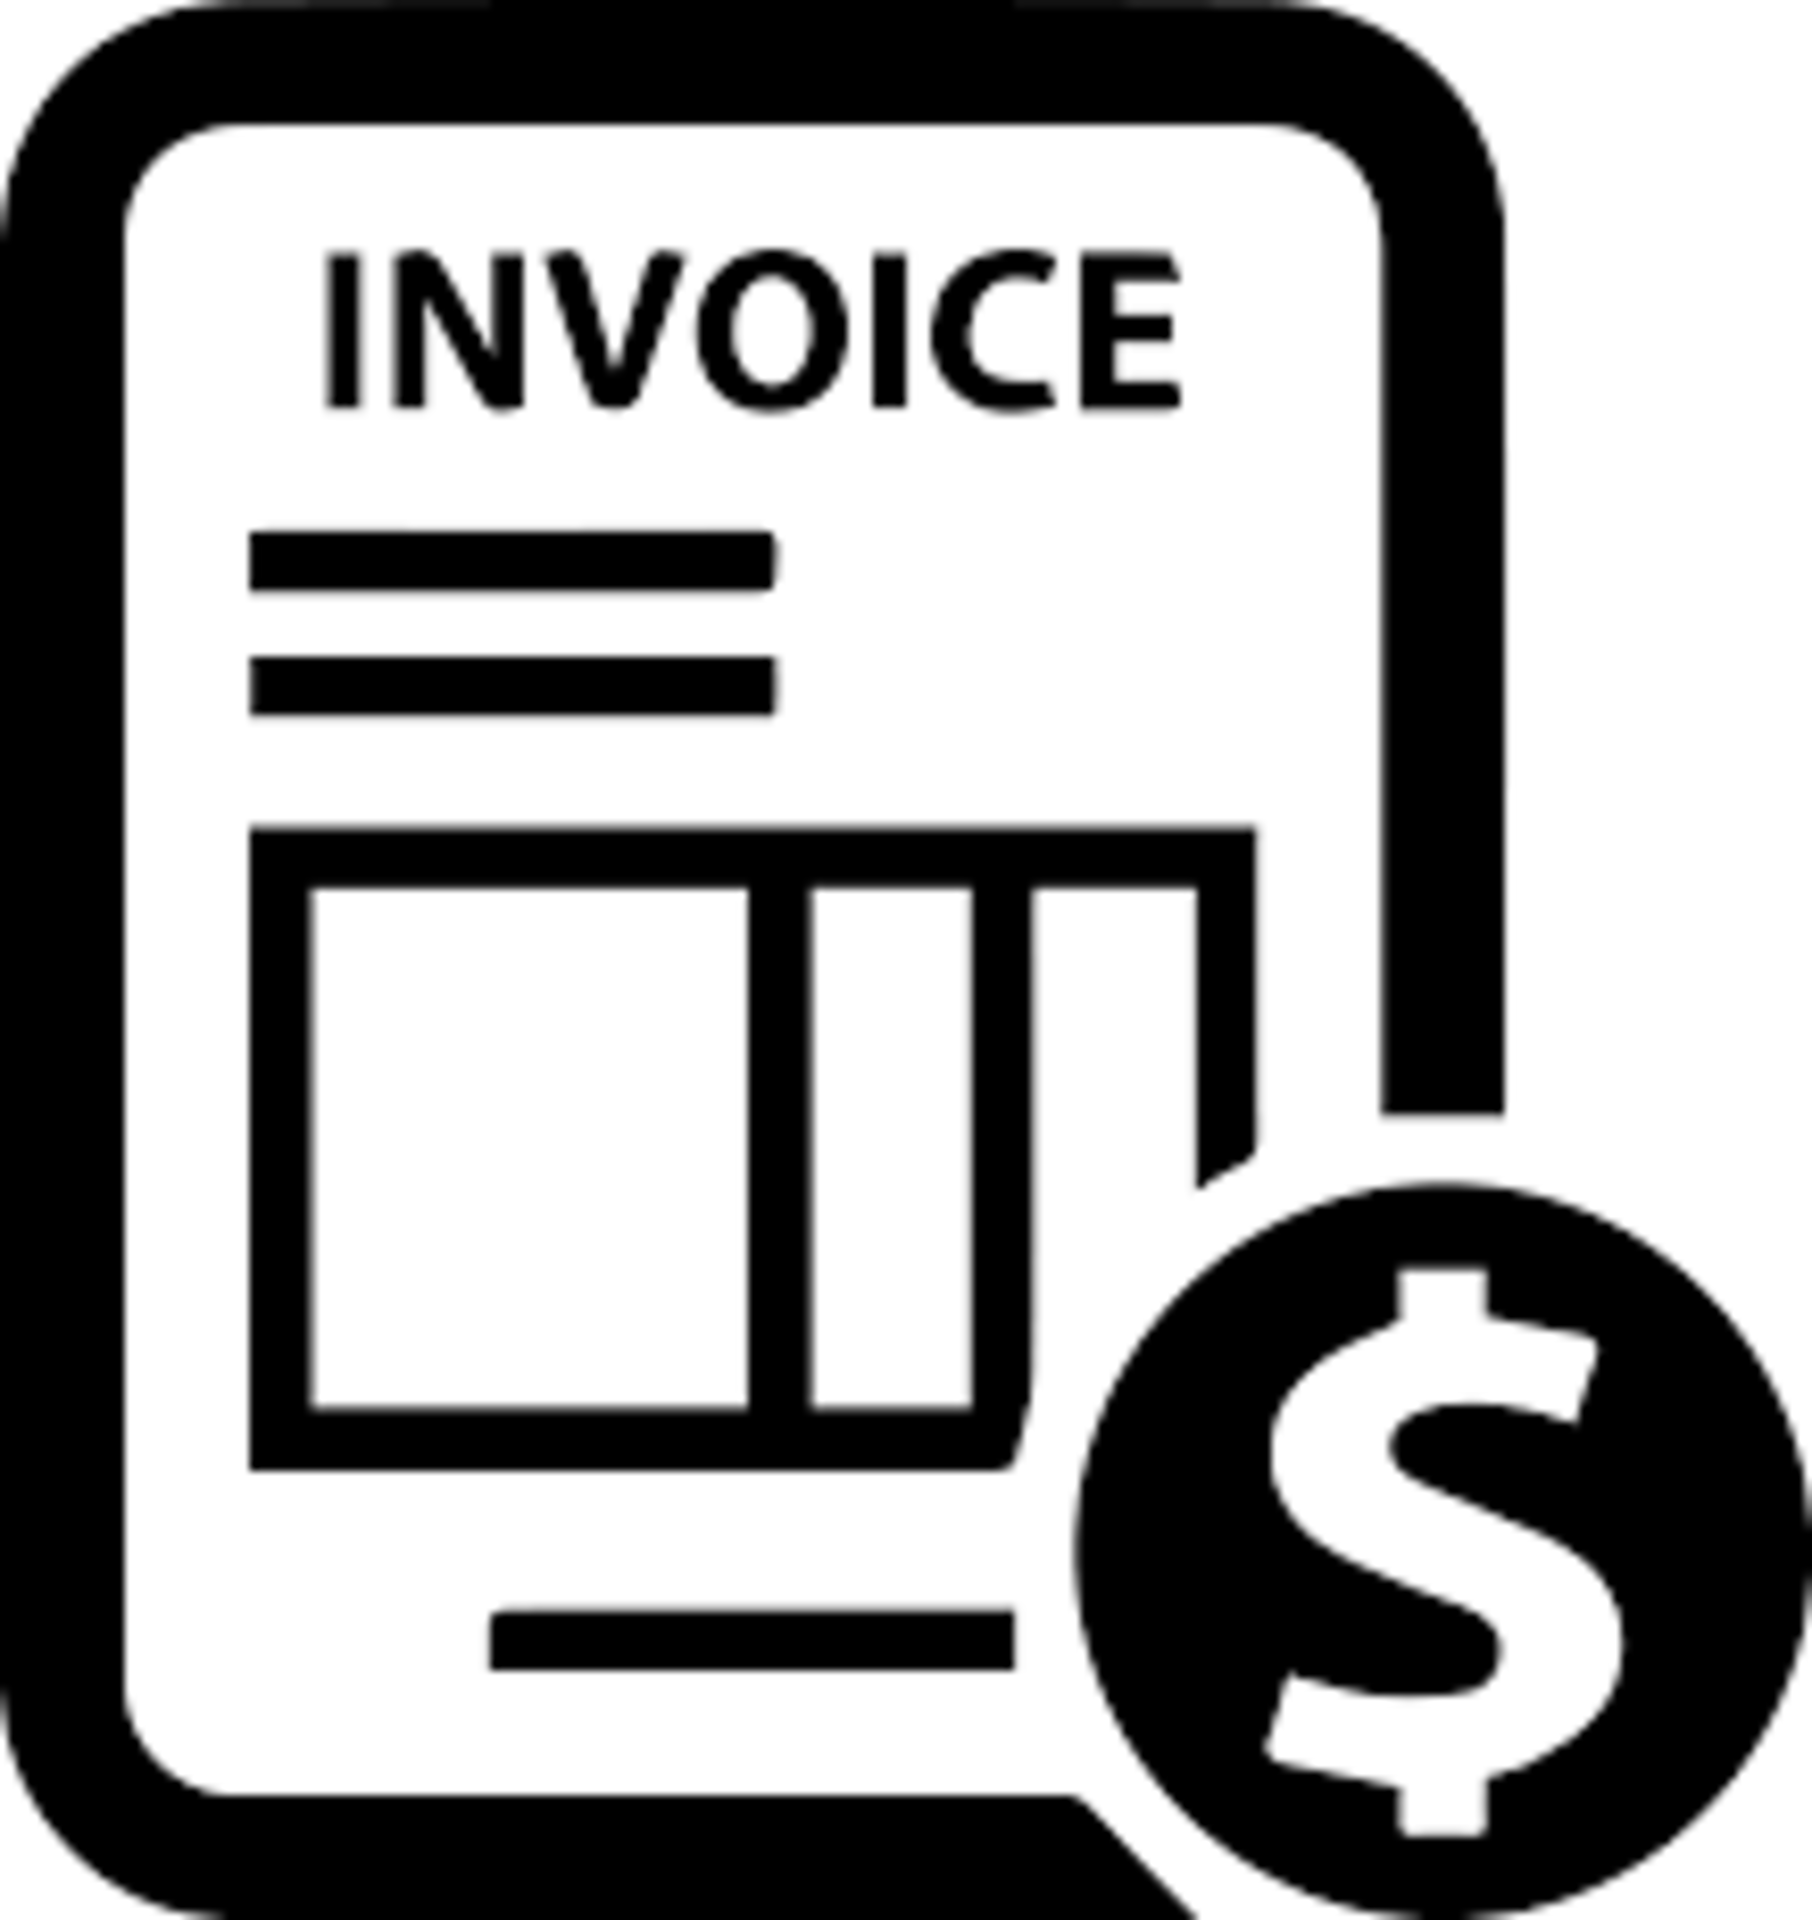 You Will Receive An Invoice At The End Of Day 2 of the Auction For Any Items That You Have Won.